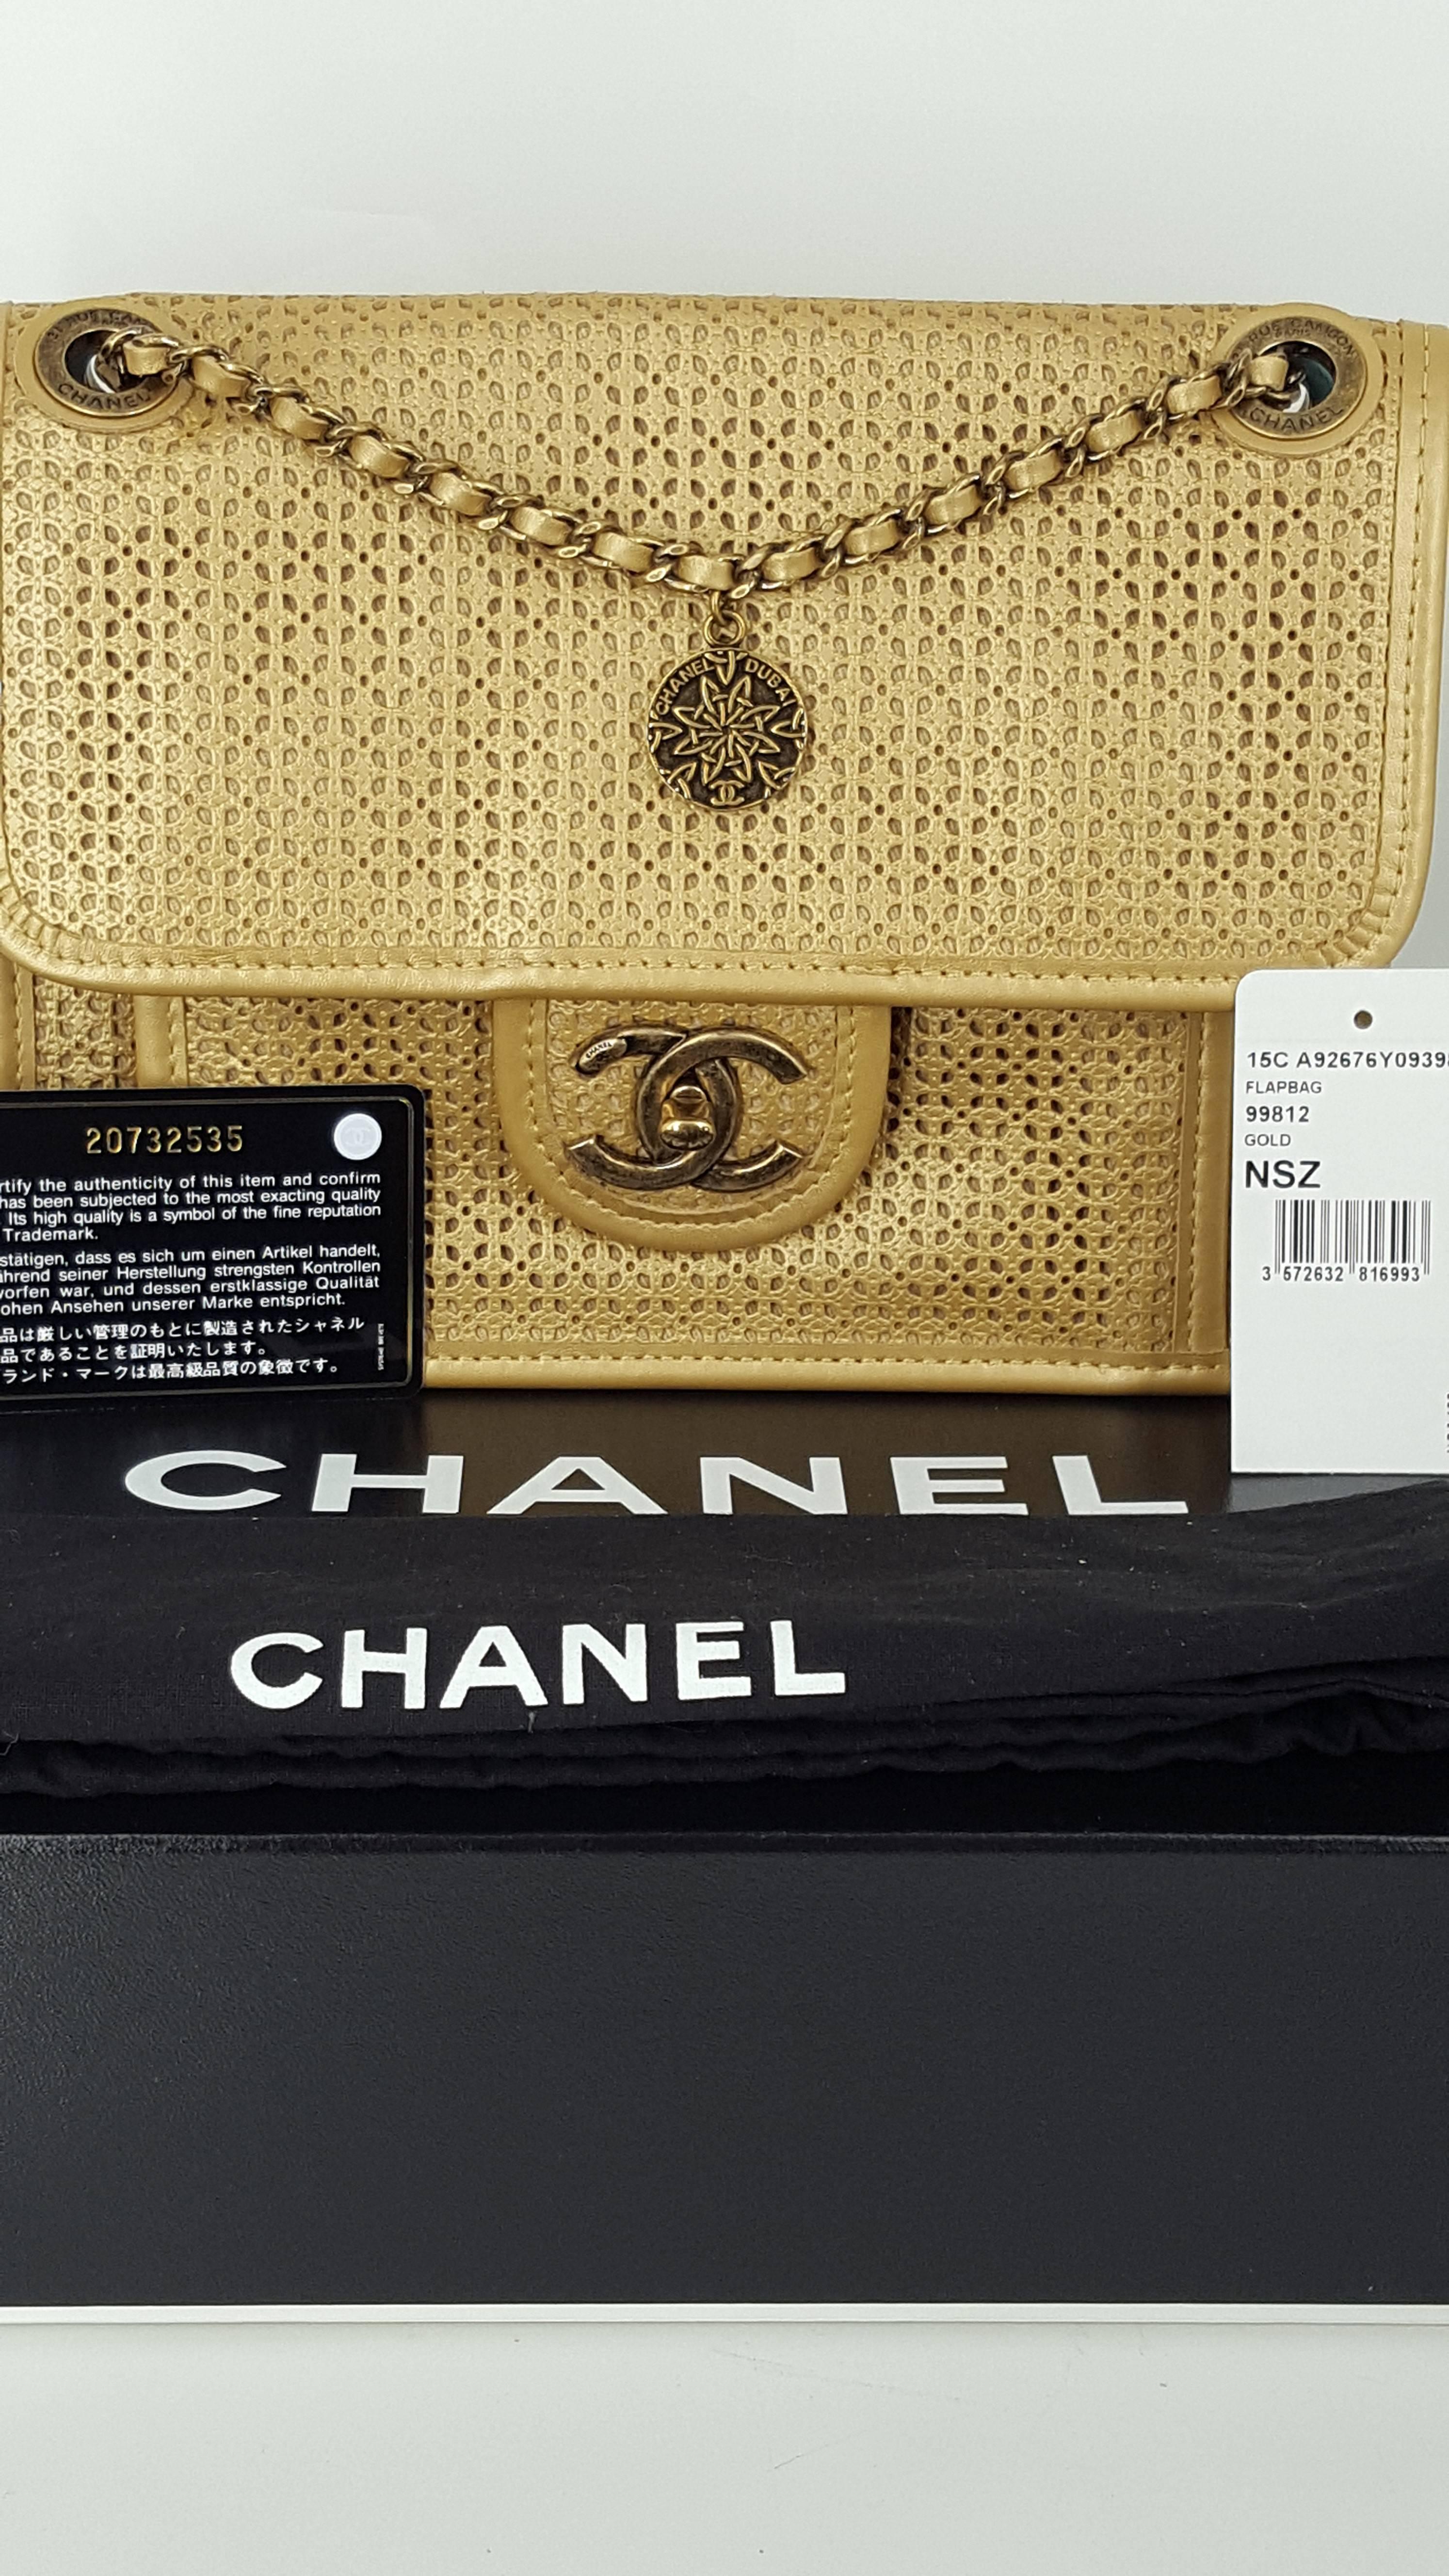 Chanel Rare Shoulder Flap Bag In Metallic Beige From the Dubai Collection 3